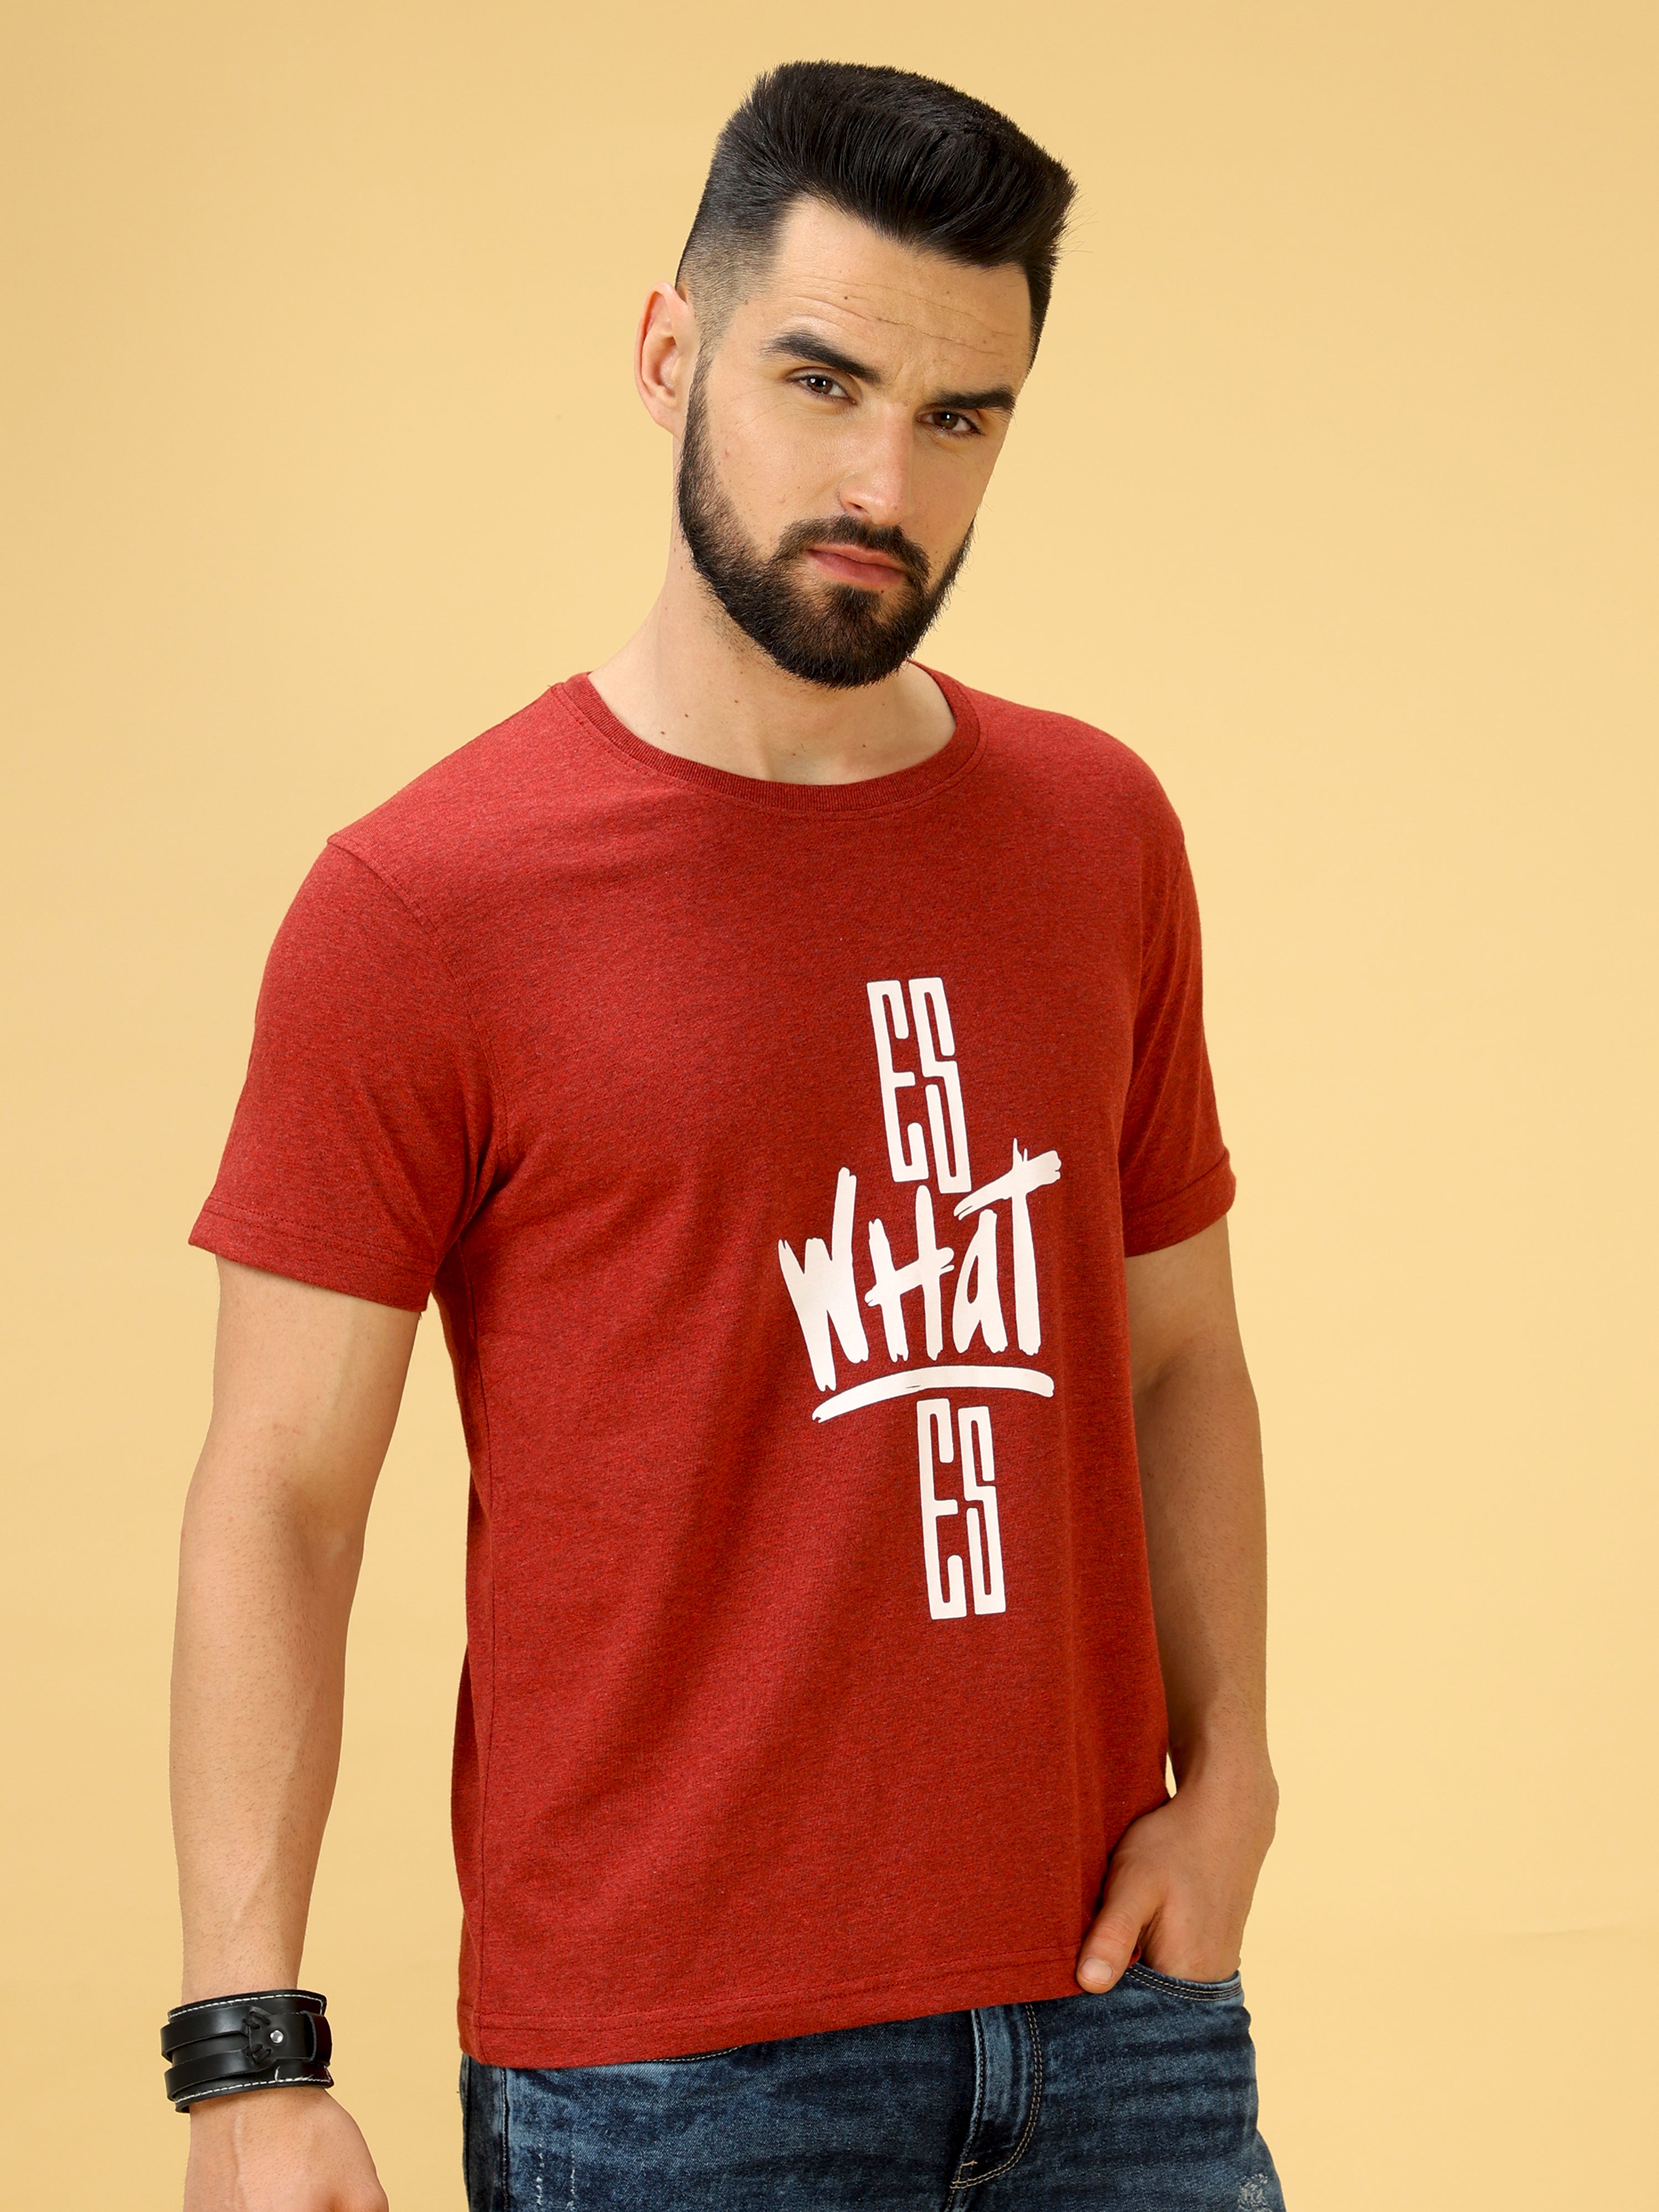 Red and White Print Crew Neck T-Shirt shop online at Estilocus. This pure cotton printed T-shirt is a stylish go-to for laidback days. Cut in a comfy regular fit. • 100% Cotton knitted interlock 190GSM• Bio washed fabric• Round neck T-shirt • Half sleeve